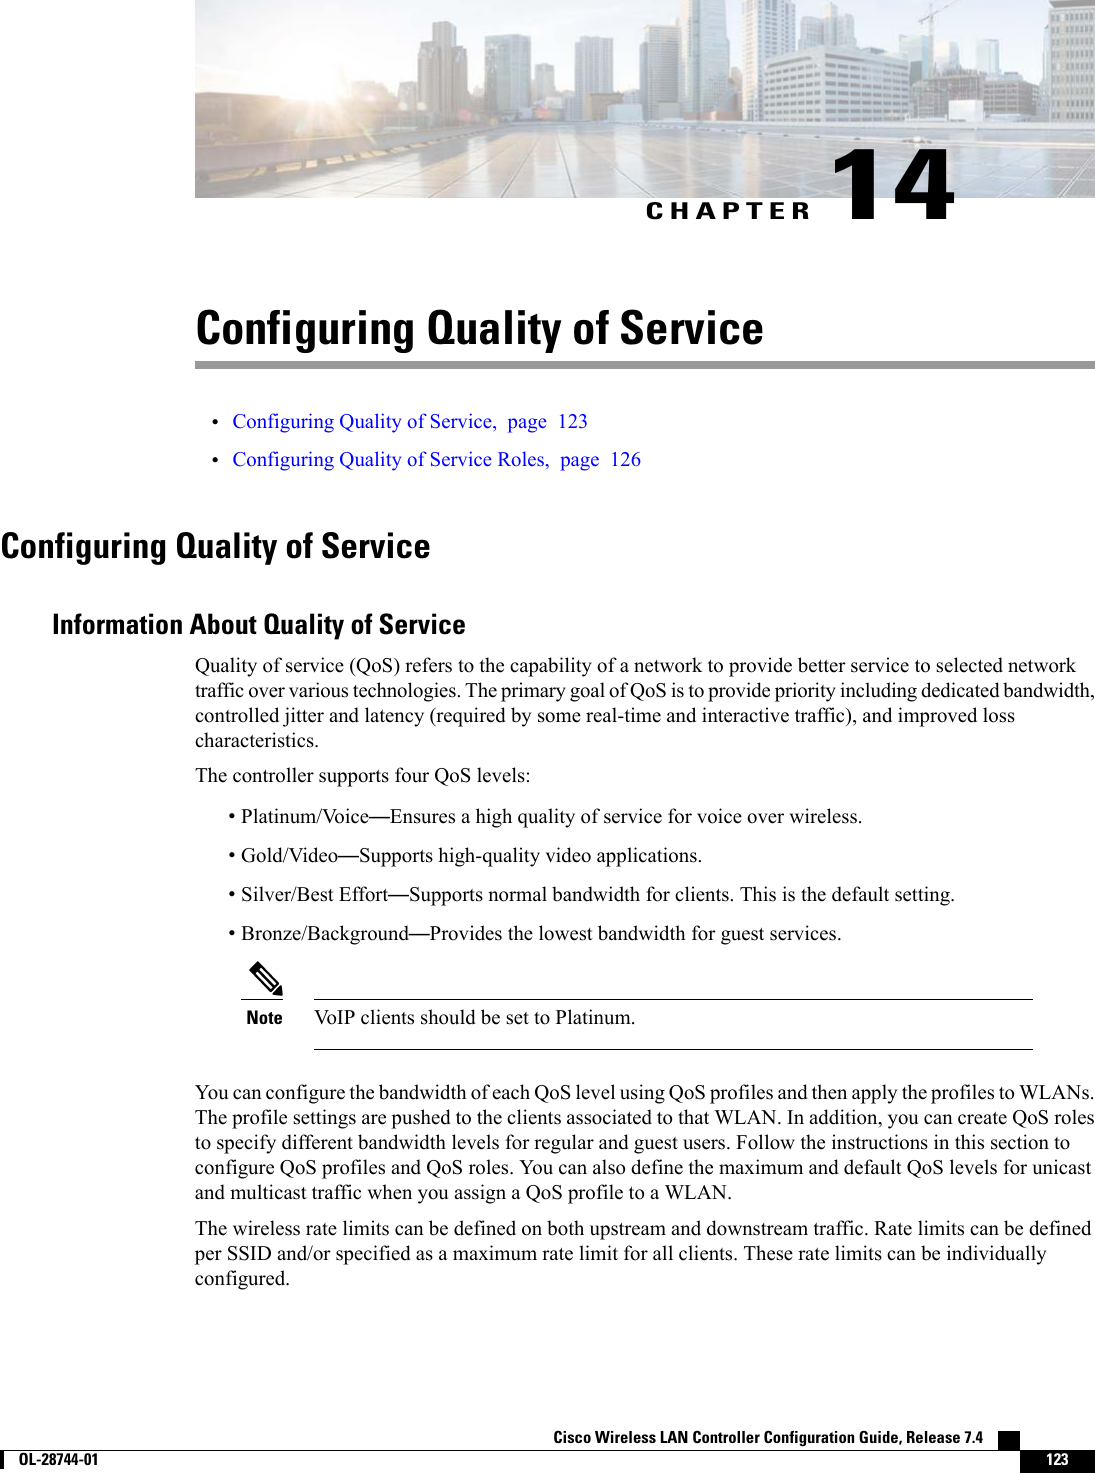 CHAPTER 14Configuring Quality of Service•Configuring Quality of Service, page 123•Configuring Quality of Service Roles, page 126Configuring Quality of ServiceInformation About Quality of ServiceQuality of service (QoS) refers to the capability of a network to provide better service to selected networktraffic over various technologies. The primary goal of QoS is to provide priority including dedicated bandwidth,controlled jitter and latency (required by some real-time and interactive traffic), and improved losscharacteristics.The controller supports four QoS levels:•Platinum/Voice—Ensures a high quality of service for voice over wireless.•Gold/Video—Supports high-quality video applications.•Silver/Best Effort—Supports normal bandwidth for clients. This is the default setting.•Bronze/Background—Provides the lowest bandwidth for guest services.VoIP clients should be set to Platinum.NoteYou can configure the bandwidth of each QoS level using QoS profiles and then apply the profiles to WLANs.The profile settings are pushed to the clients associated to that WLAN. In addition, you can create QoS rolesto specify different bandwidth levels for regular and guest users. Follow the instructions in this section toconfigure QoS profiles and QoS roles. You can also define the maximum and default QoS levels for unicastand multicast traffic when you assign a QoS profile to a WLAN.The wireless rate limits can be defined on both upstream and downstream traffic. Rate limits can be definedper SSID and/or specified as a maximum rate limit for all clients. These rate limits can be individuallyconfigured.Cisco Wireless LAN Controller Configuration Guide, Release 7.4        OL-28744-01 123